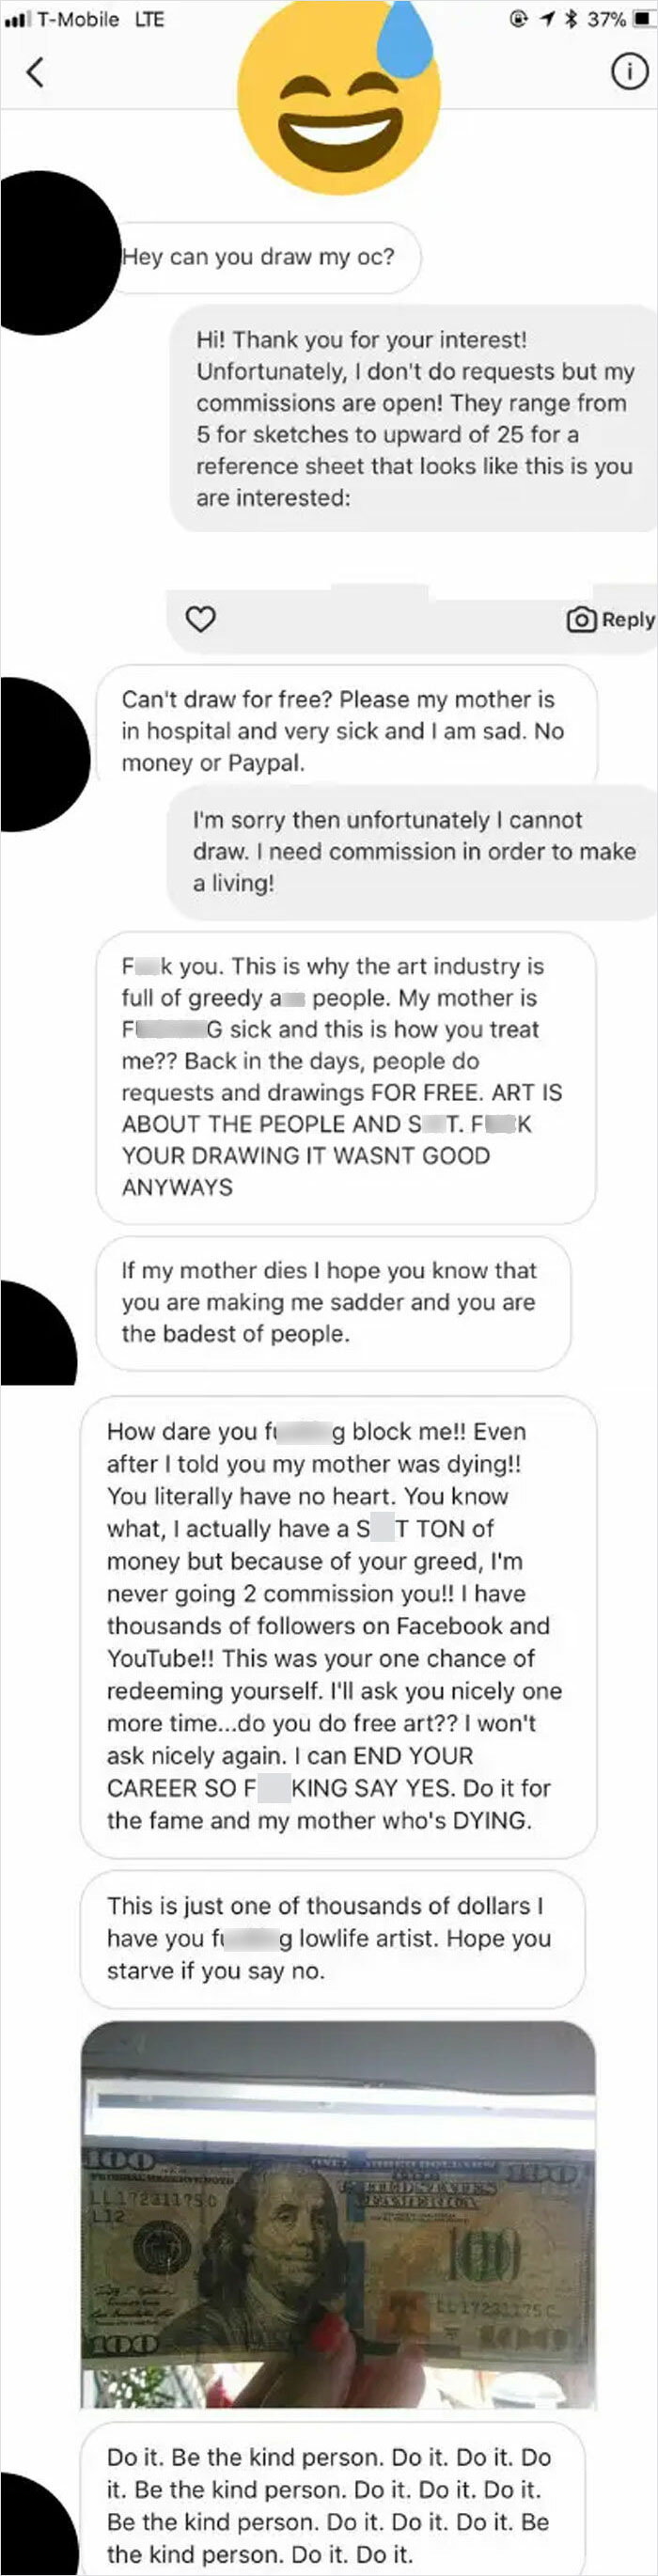 Person Beg For Free Art And Ends Blocked. Then Creates Another Account To Threat The Artist